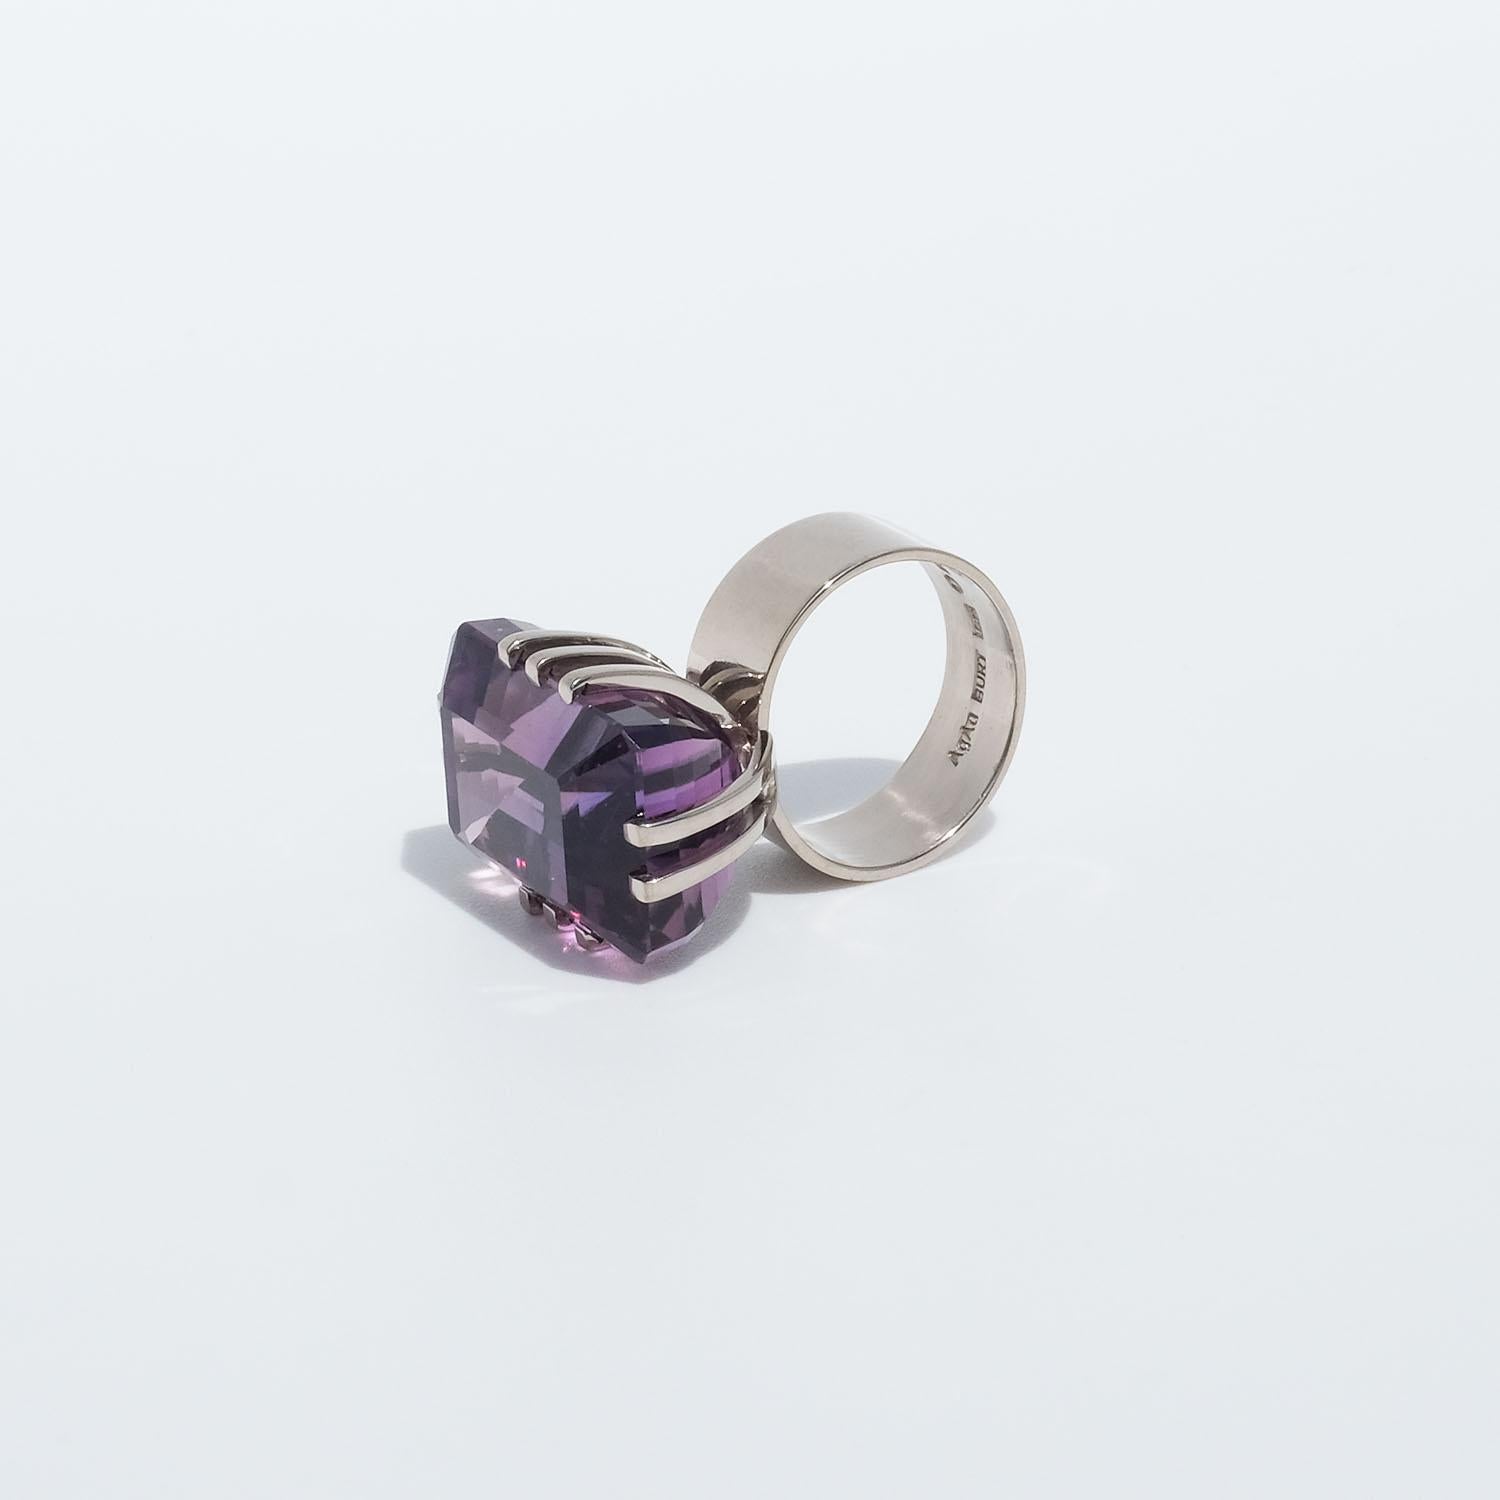 18k White Gold and Amethyst Ring by Swedish Master Burt Edman, Made Year 2003 For Sale 3